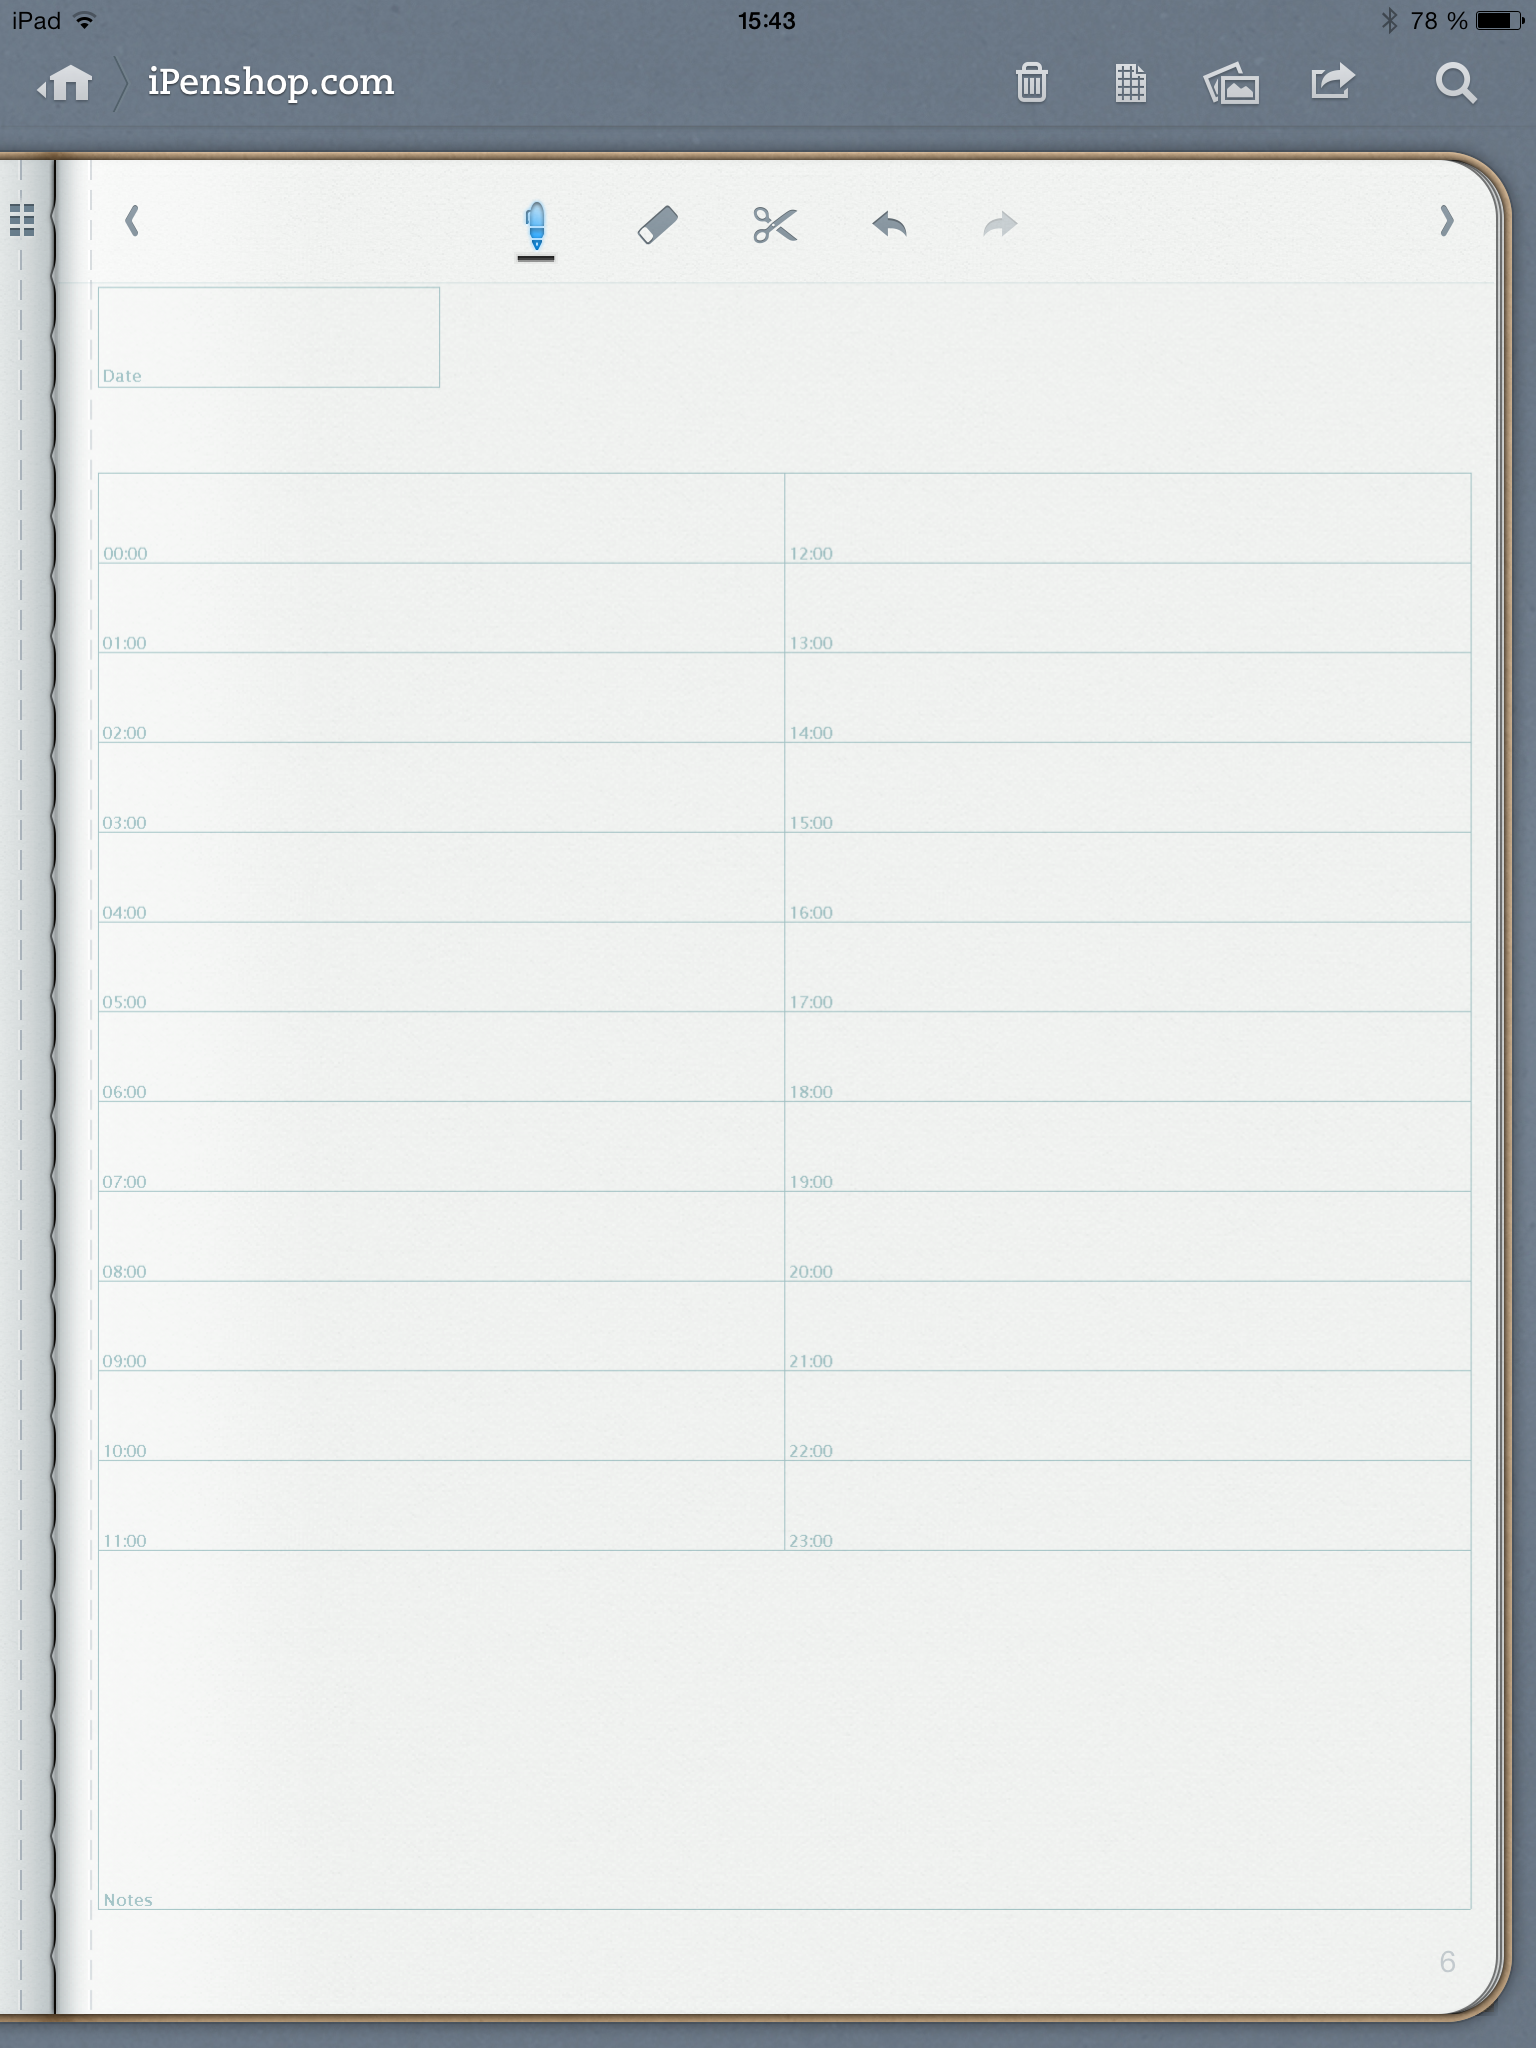 iPadpapers.com - planner paper templates